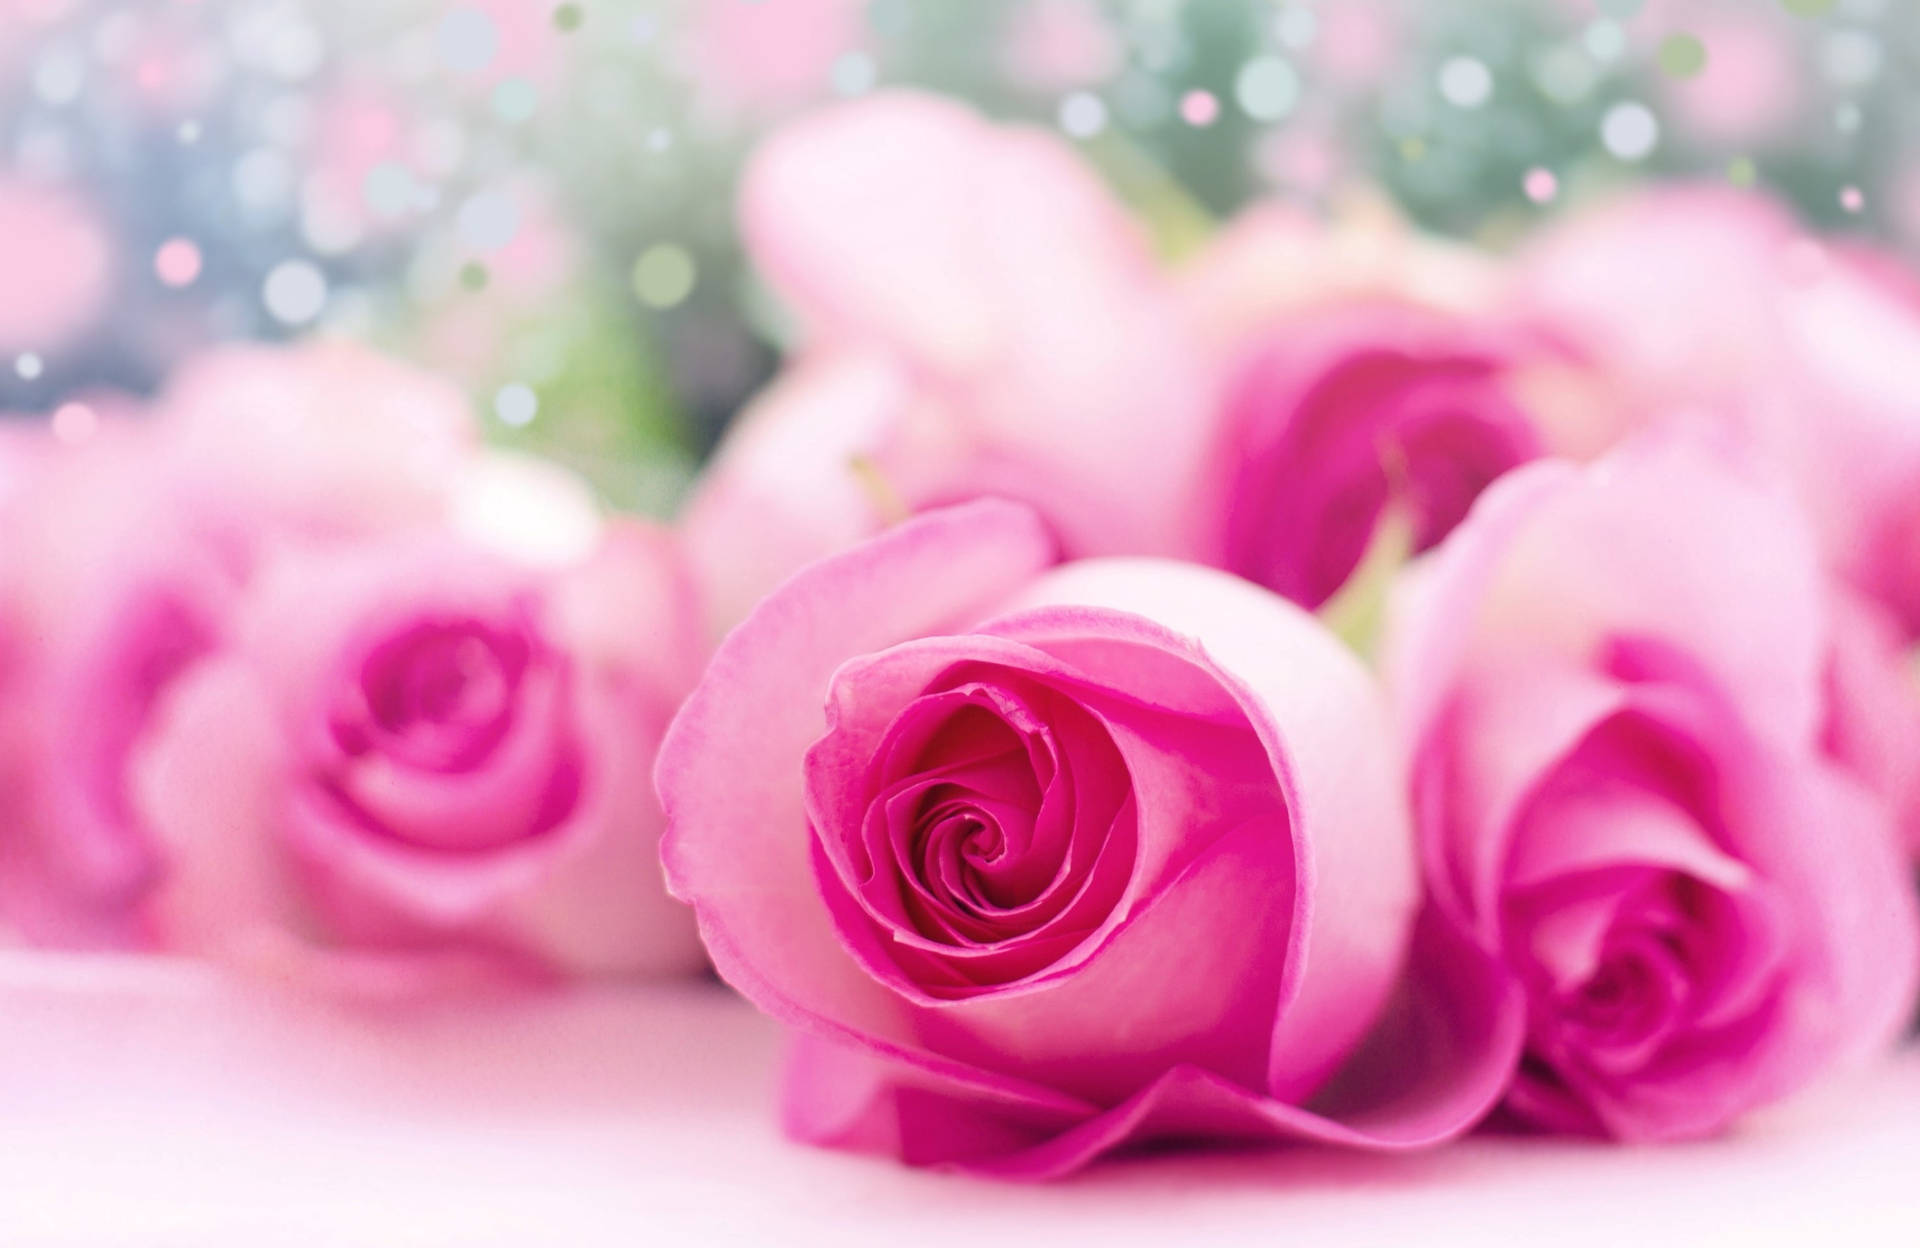 Delicate Bloom - Picture of Cute Pink Roses Wallpaper